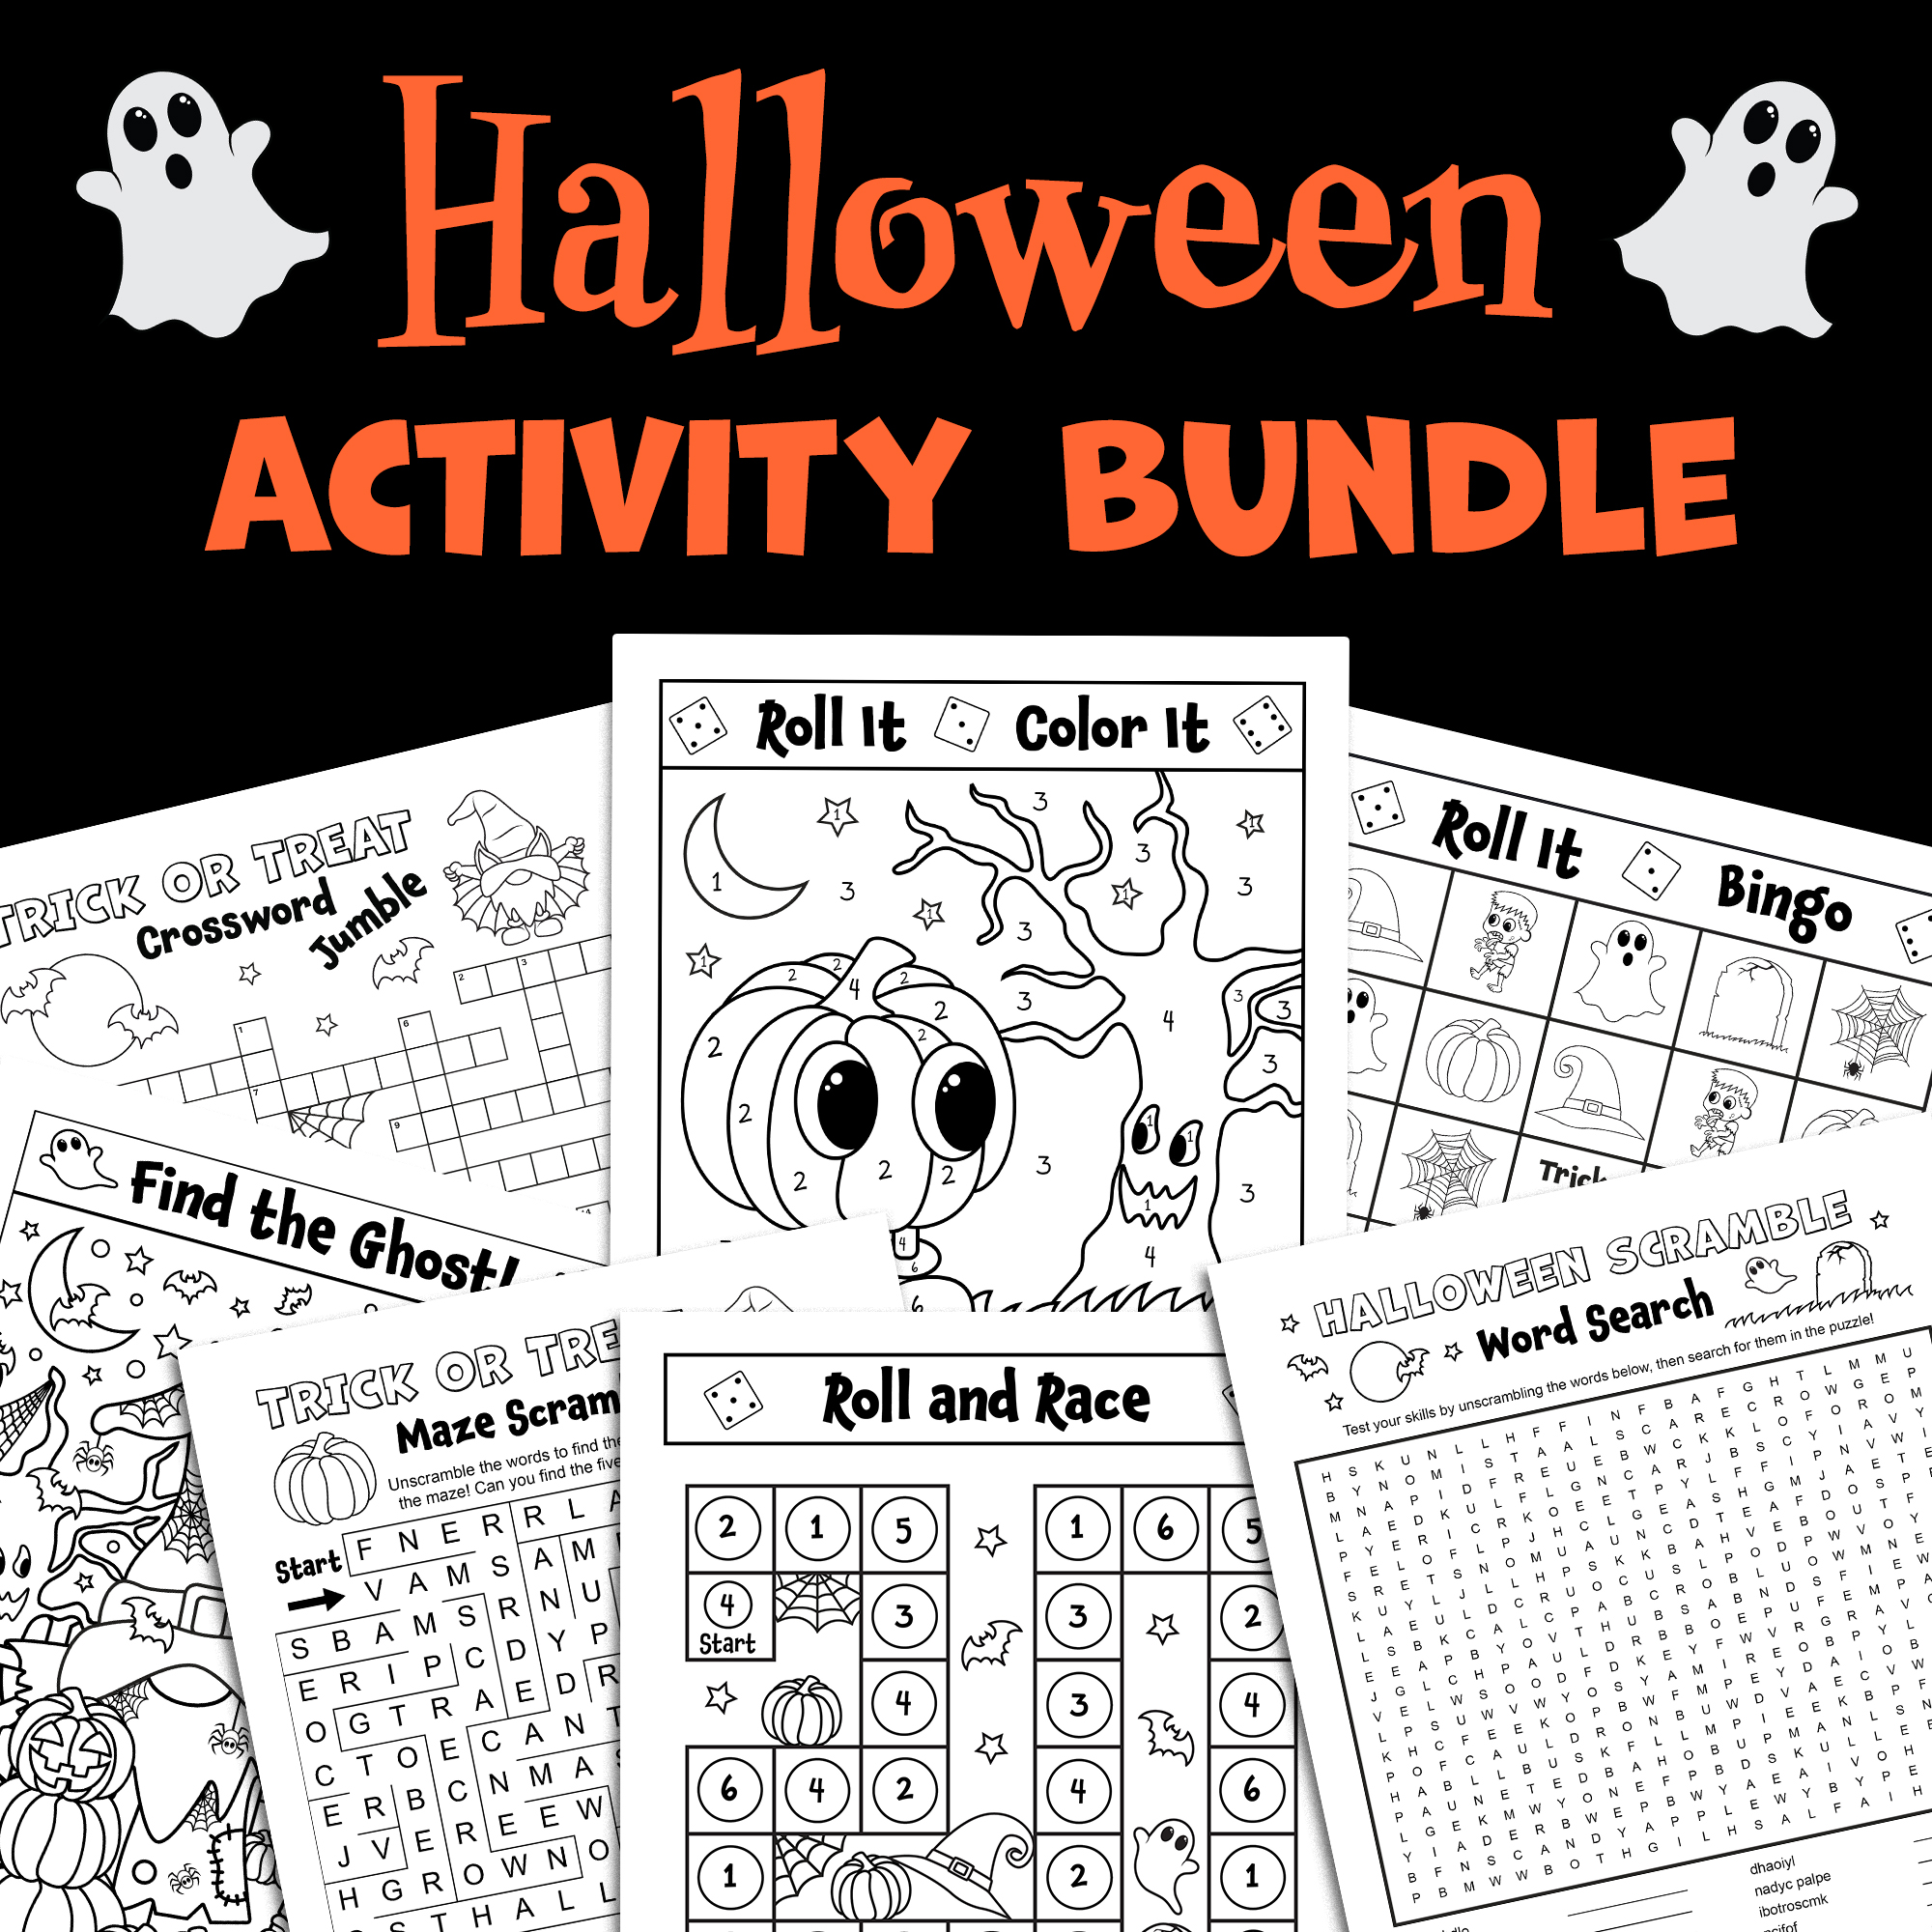 Bundle halloween activities word scramble word search crossword coloring pages dice games made by teachers